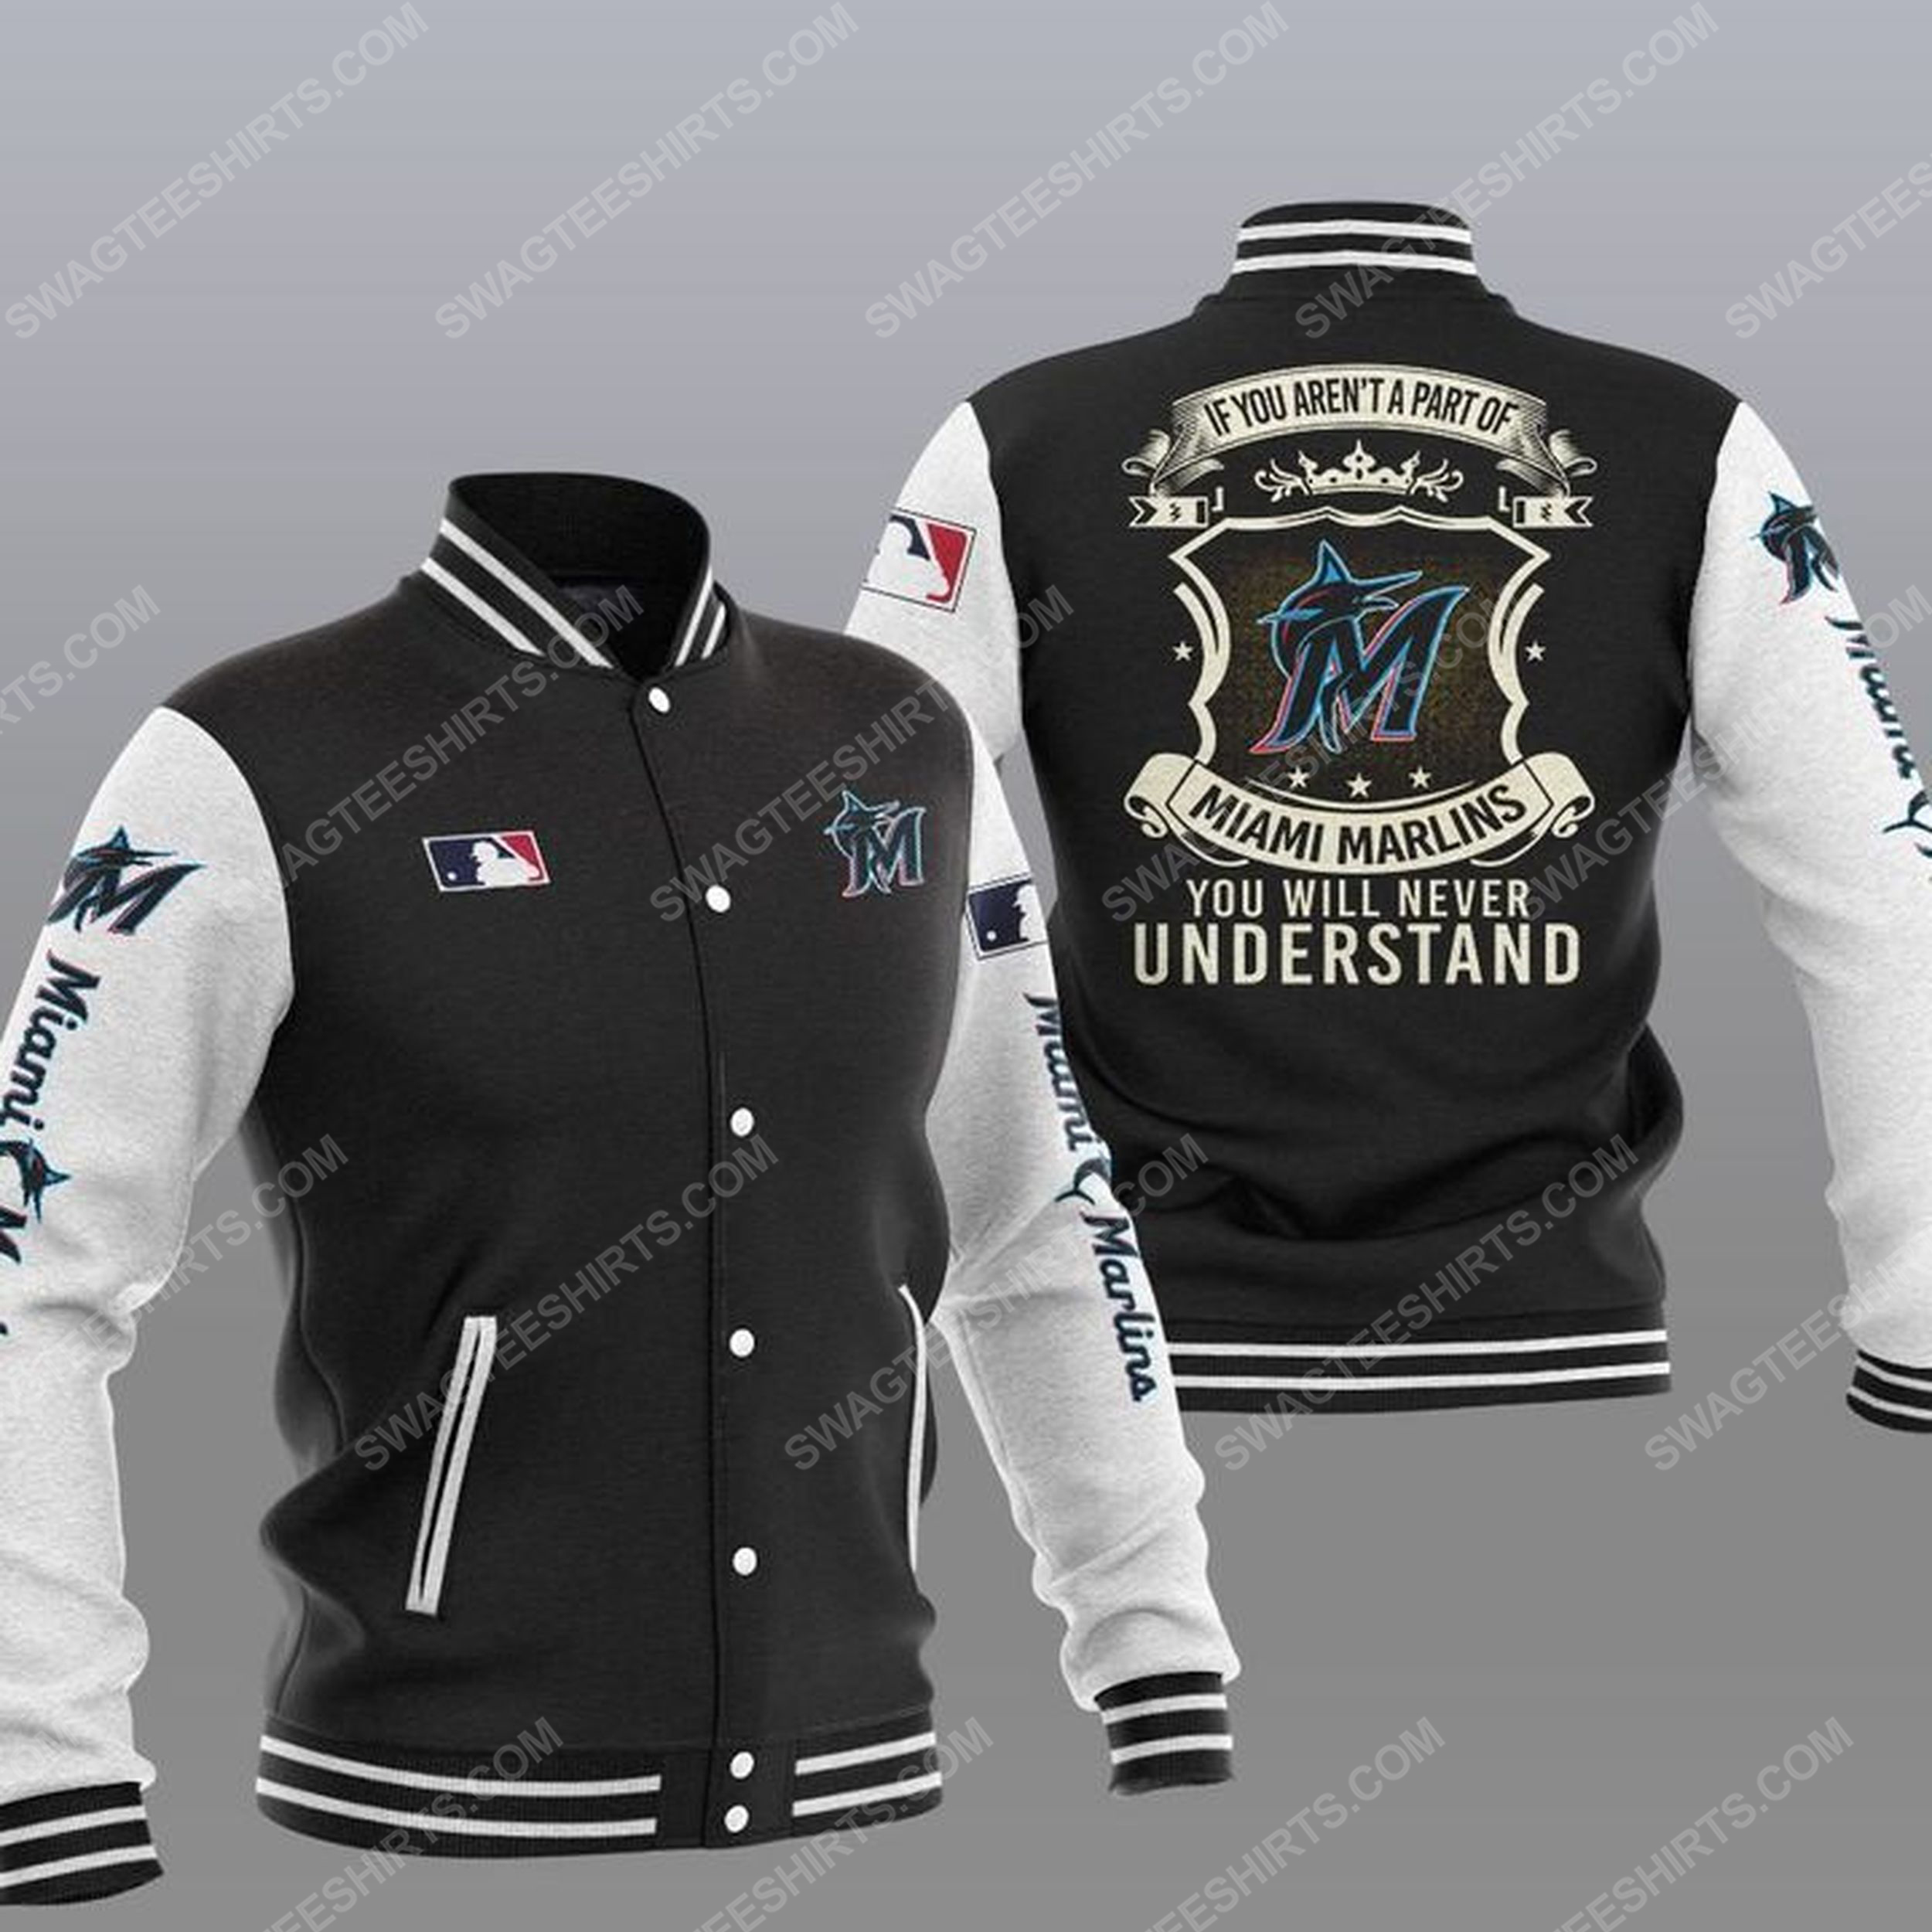 You will never understand miami marlins all over print baseball jacket - black 1